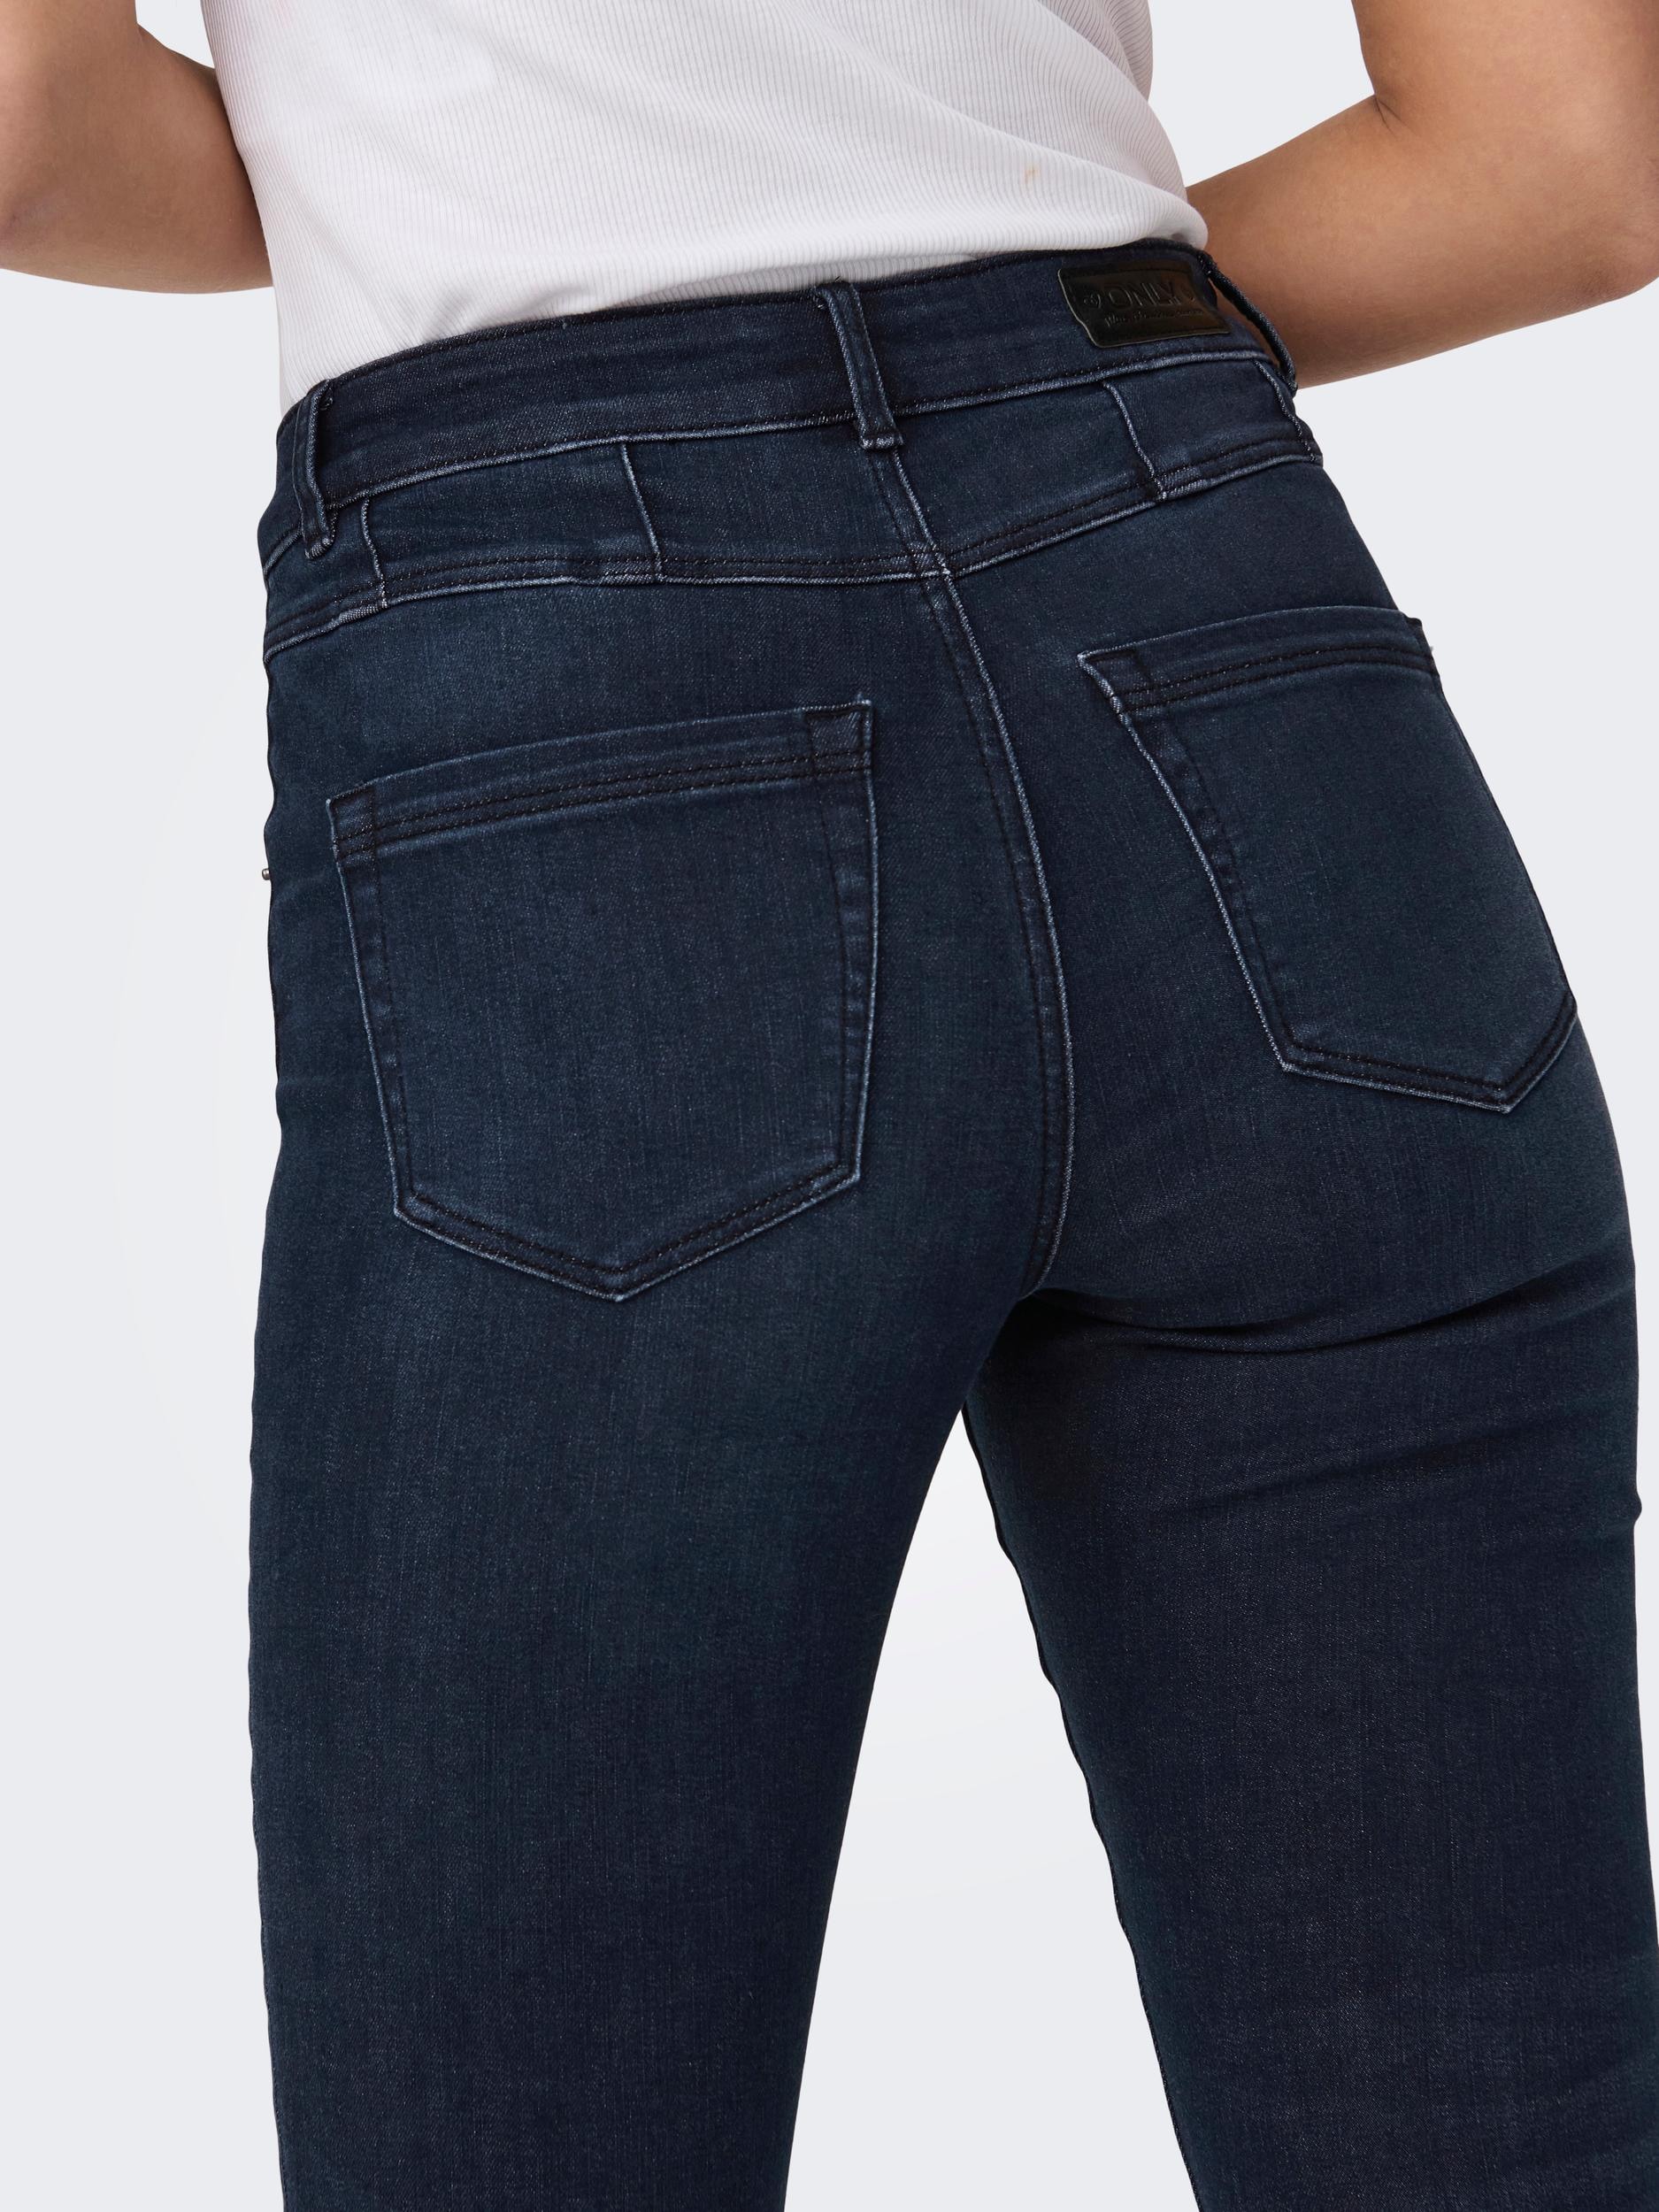 BUT »ONLWAUW DNM Skinny-fit-Jeans HW Commander ONLY EXT« SKINNY DOU confortablement CUT